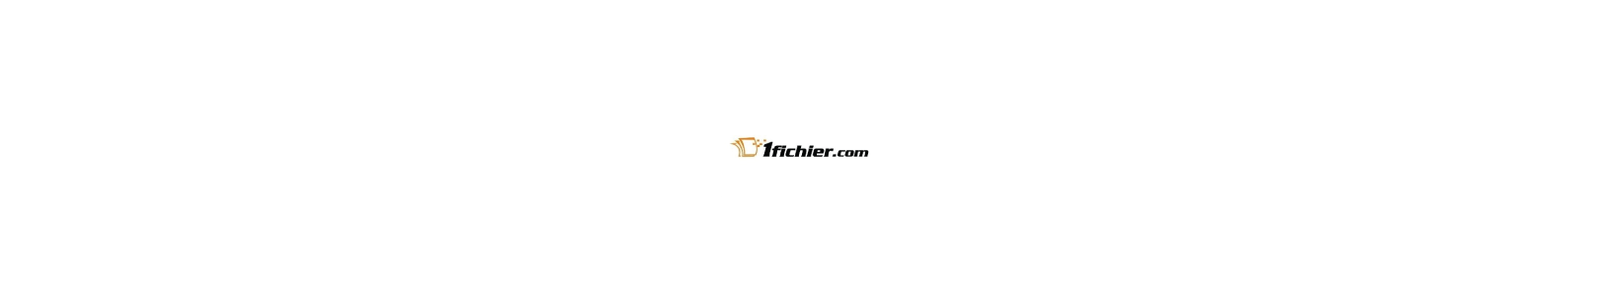 1Fichier  Official Reseller of Premium Accounts in India  Hotfilepremiumstore